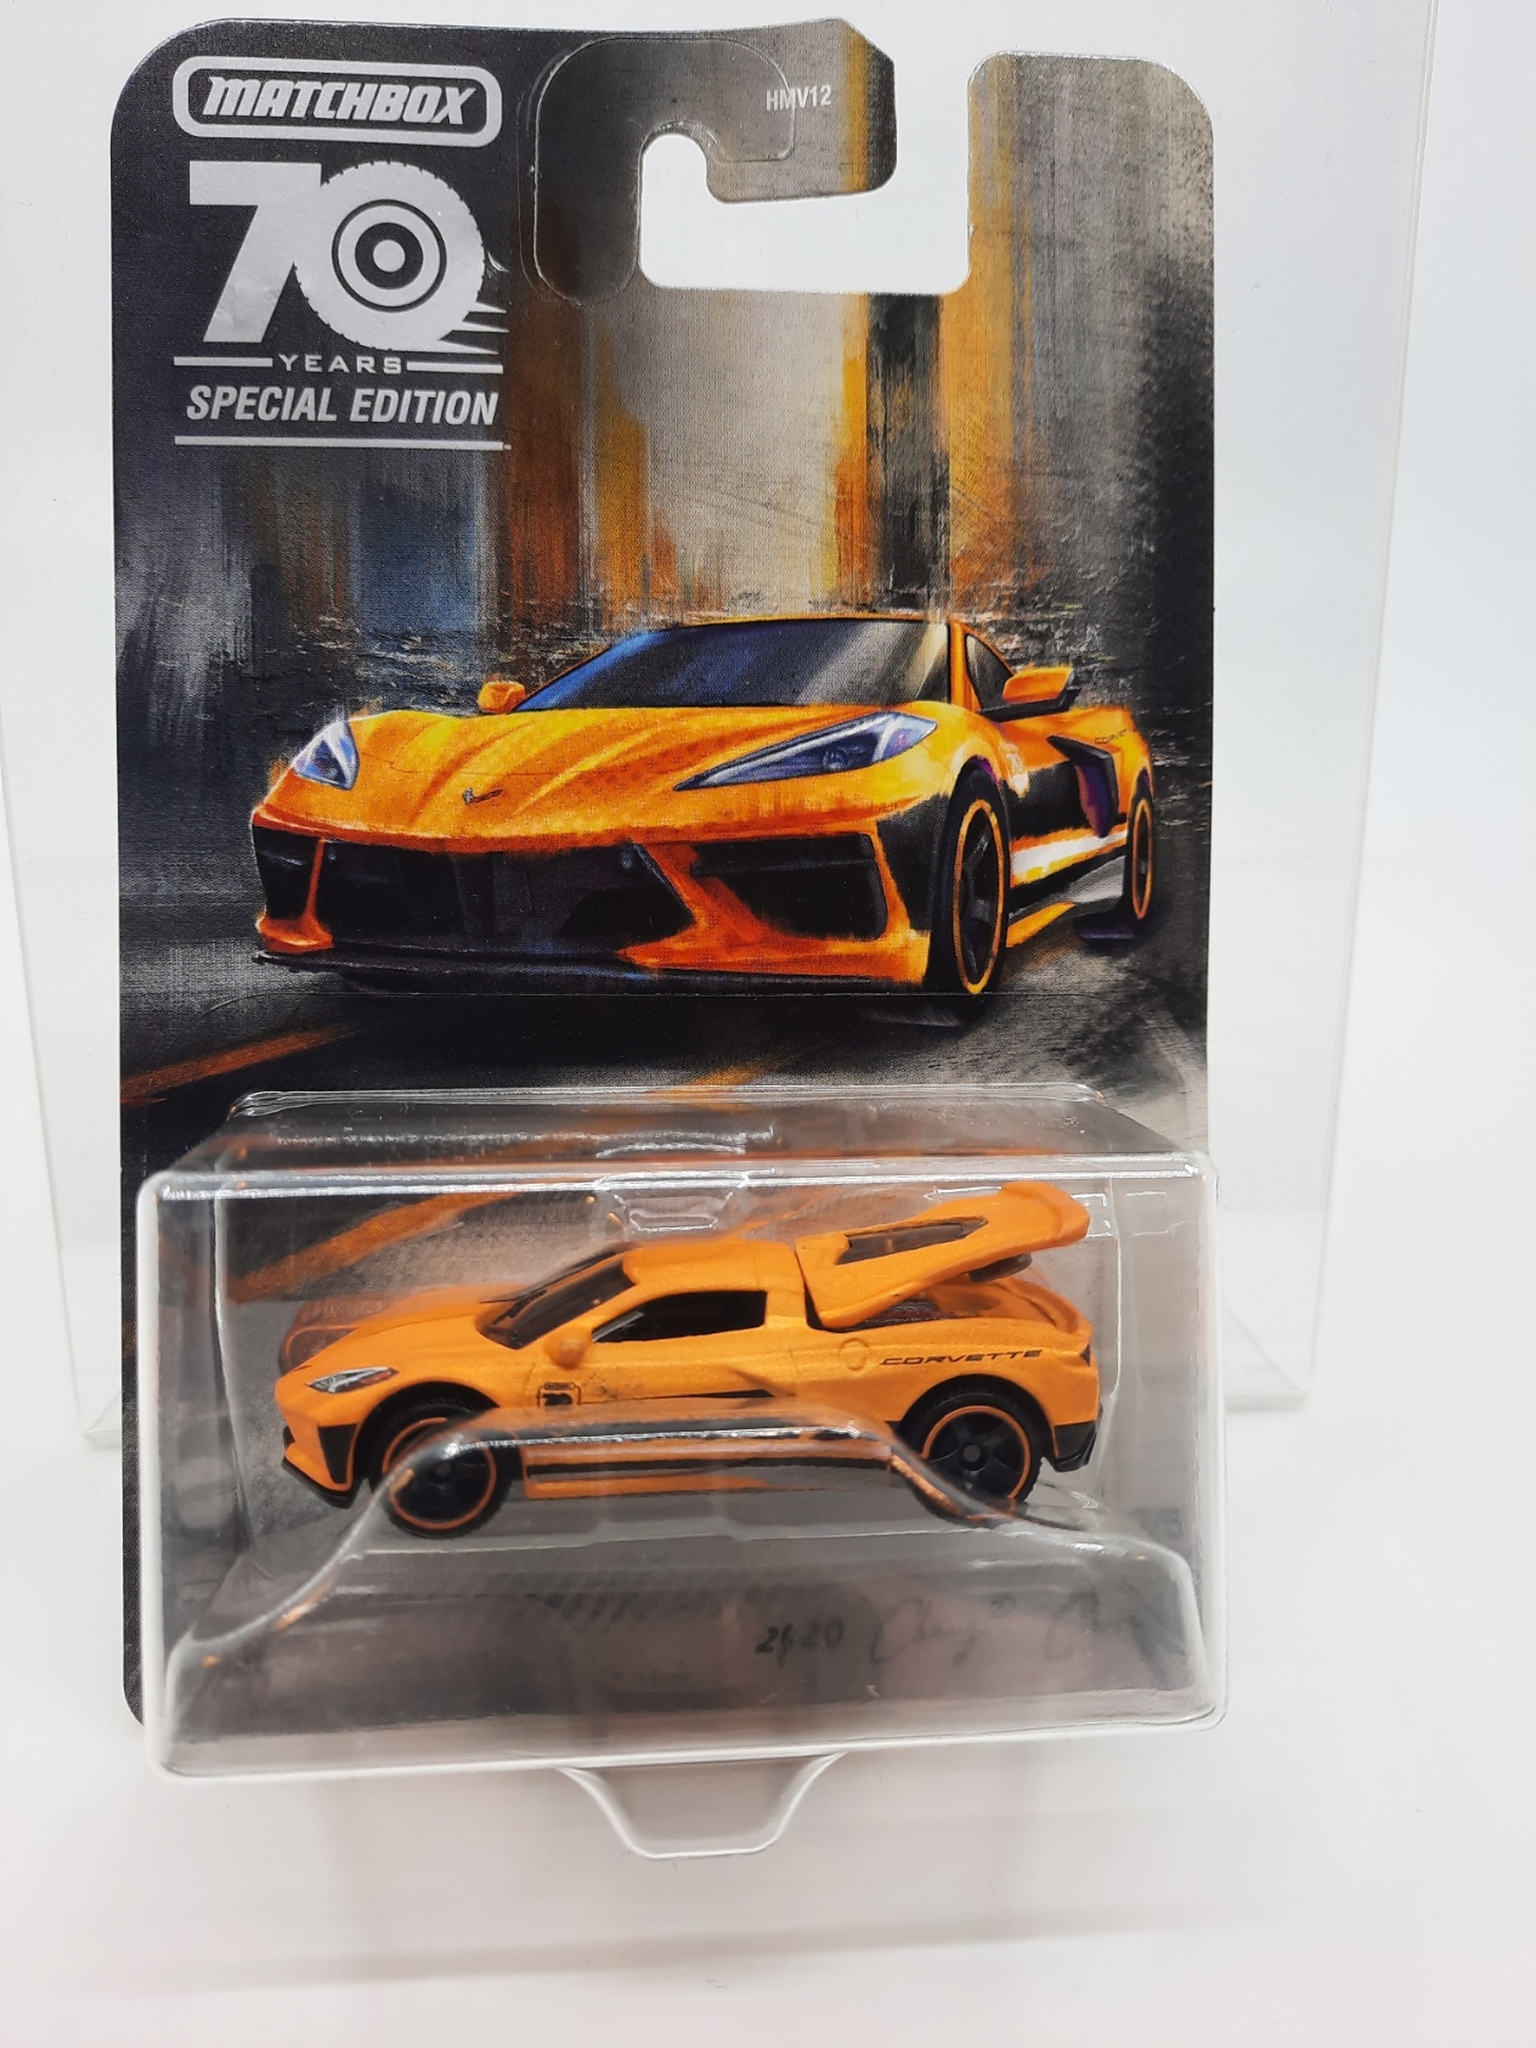 Matchbox 70 years special edition - Chevy Corvette 2020